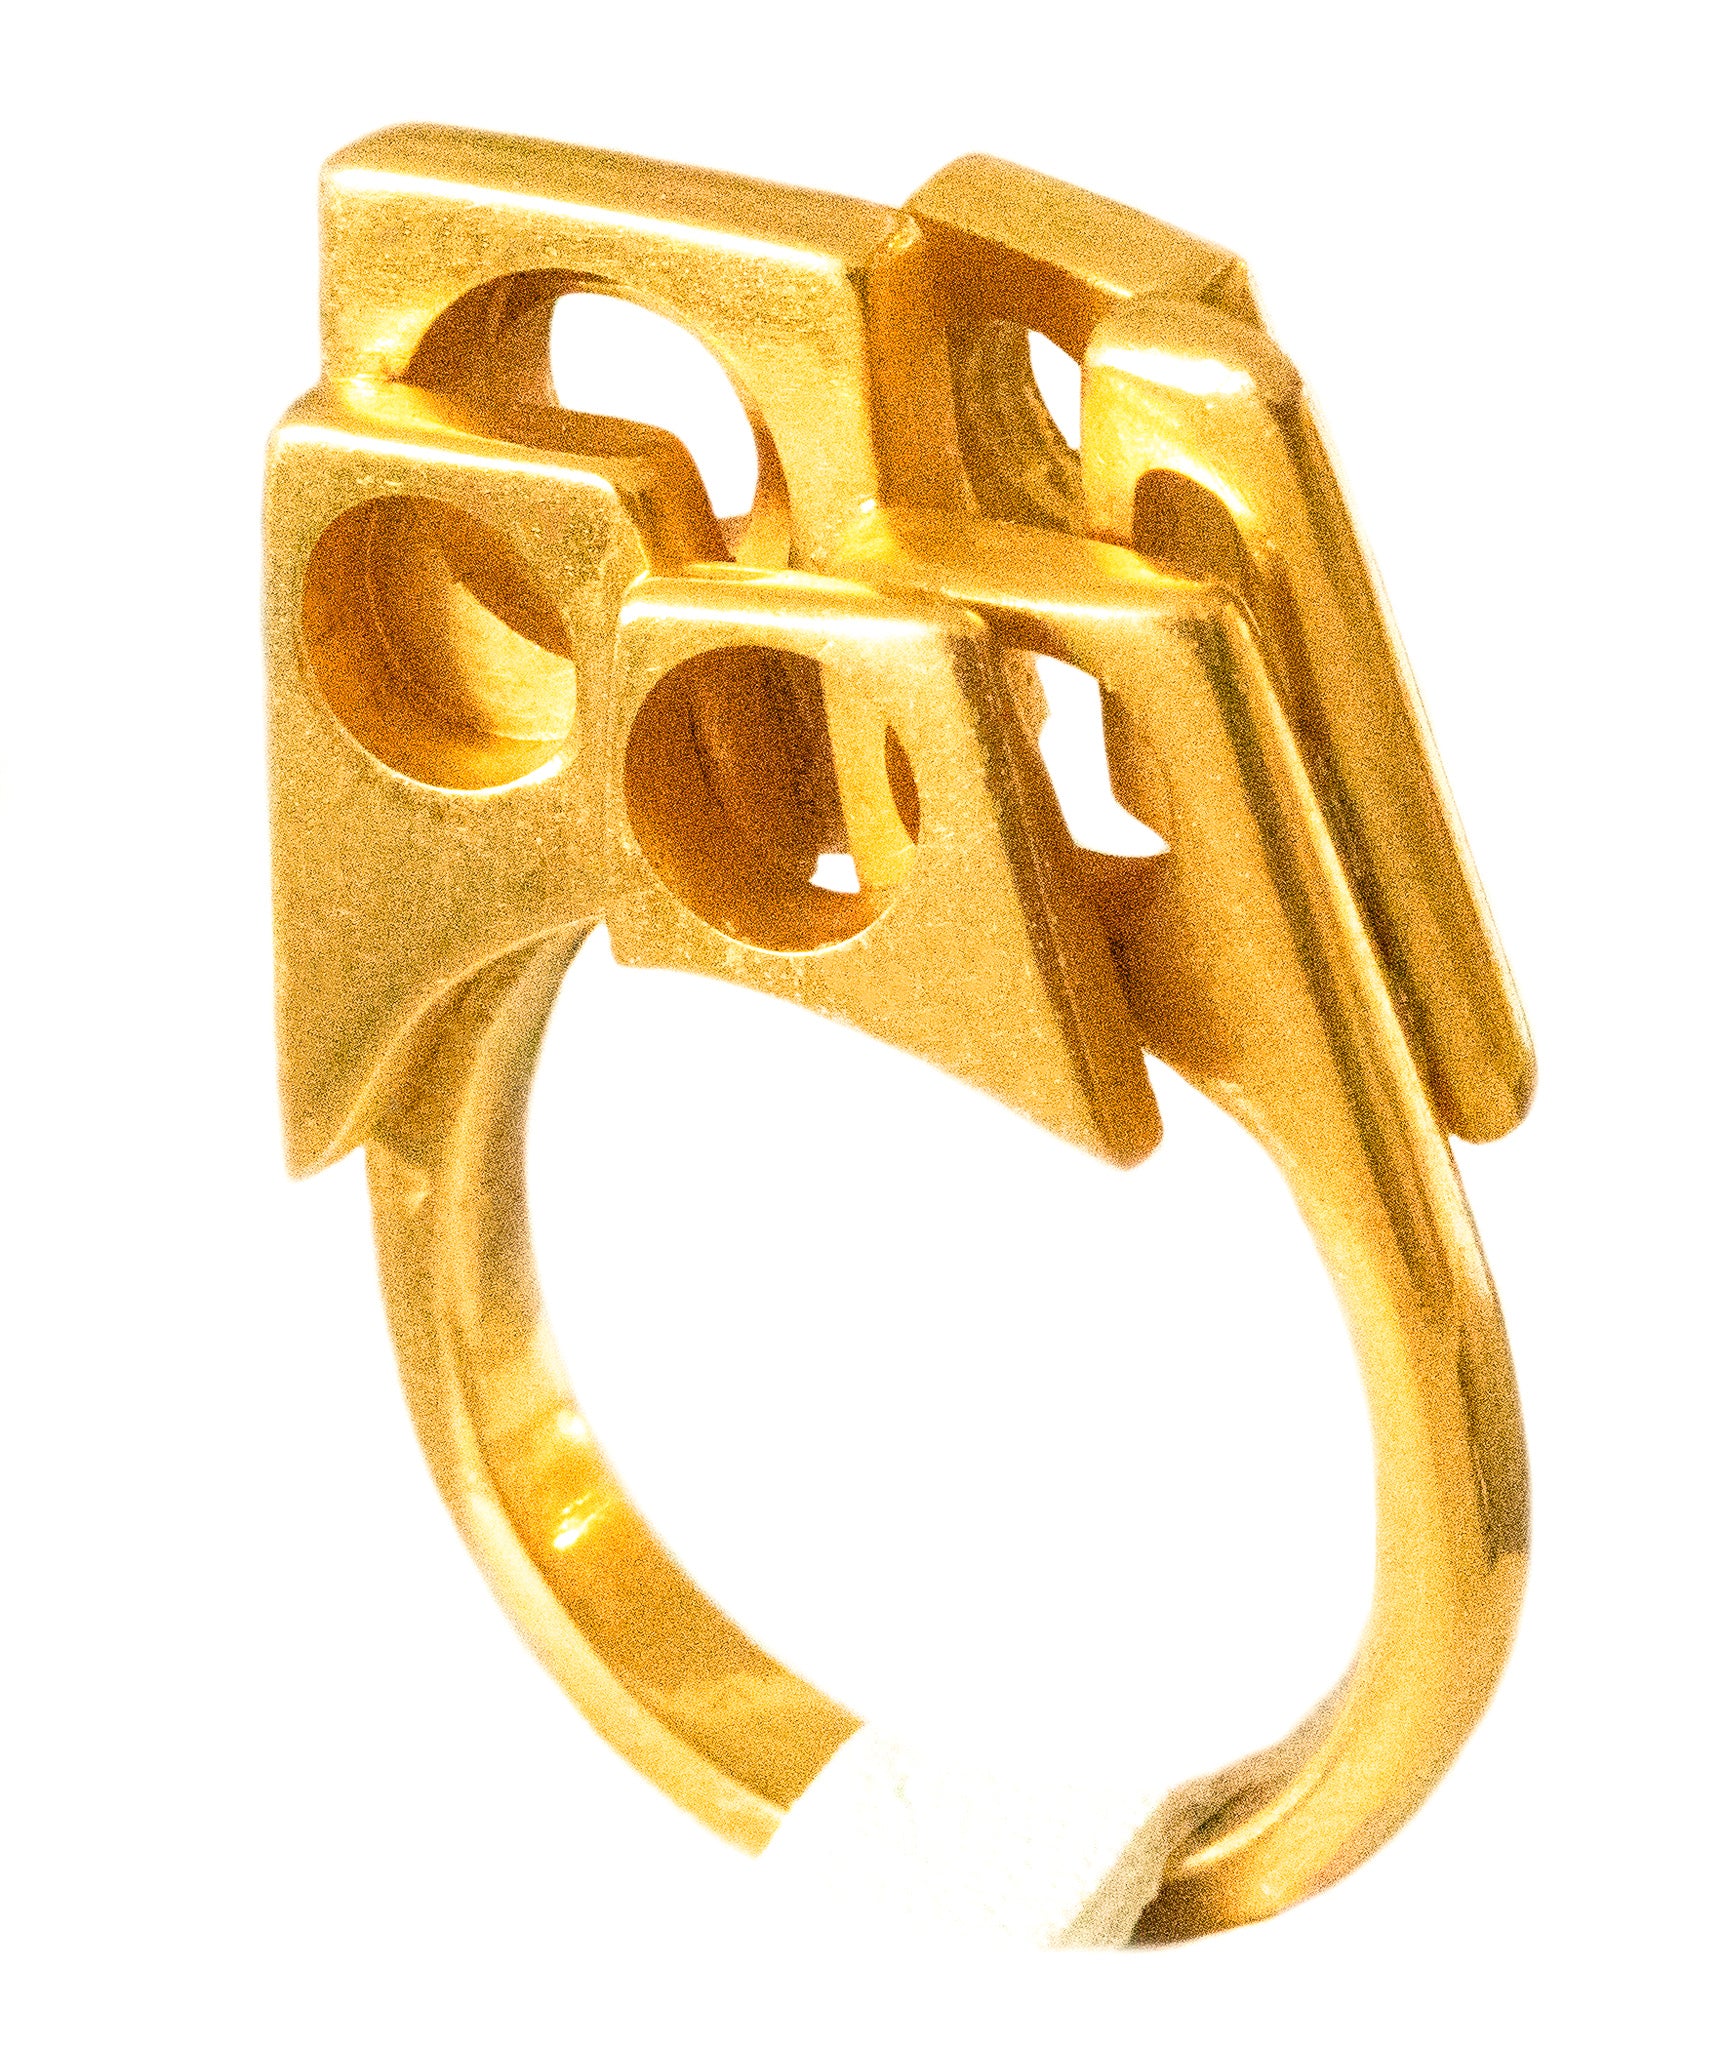 GEOMETRICAL ARCHITECTURAL RING IN SOLID 22 KT GOLD